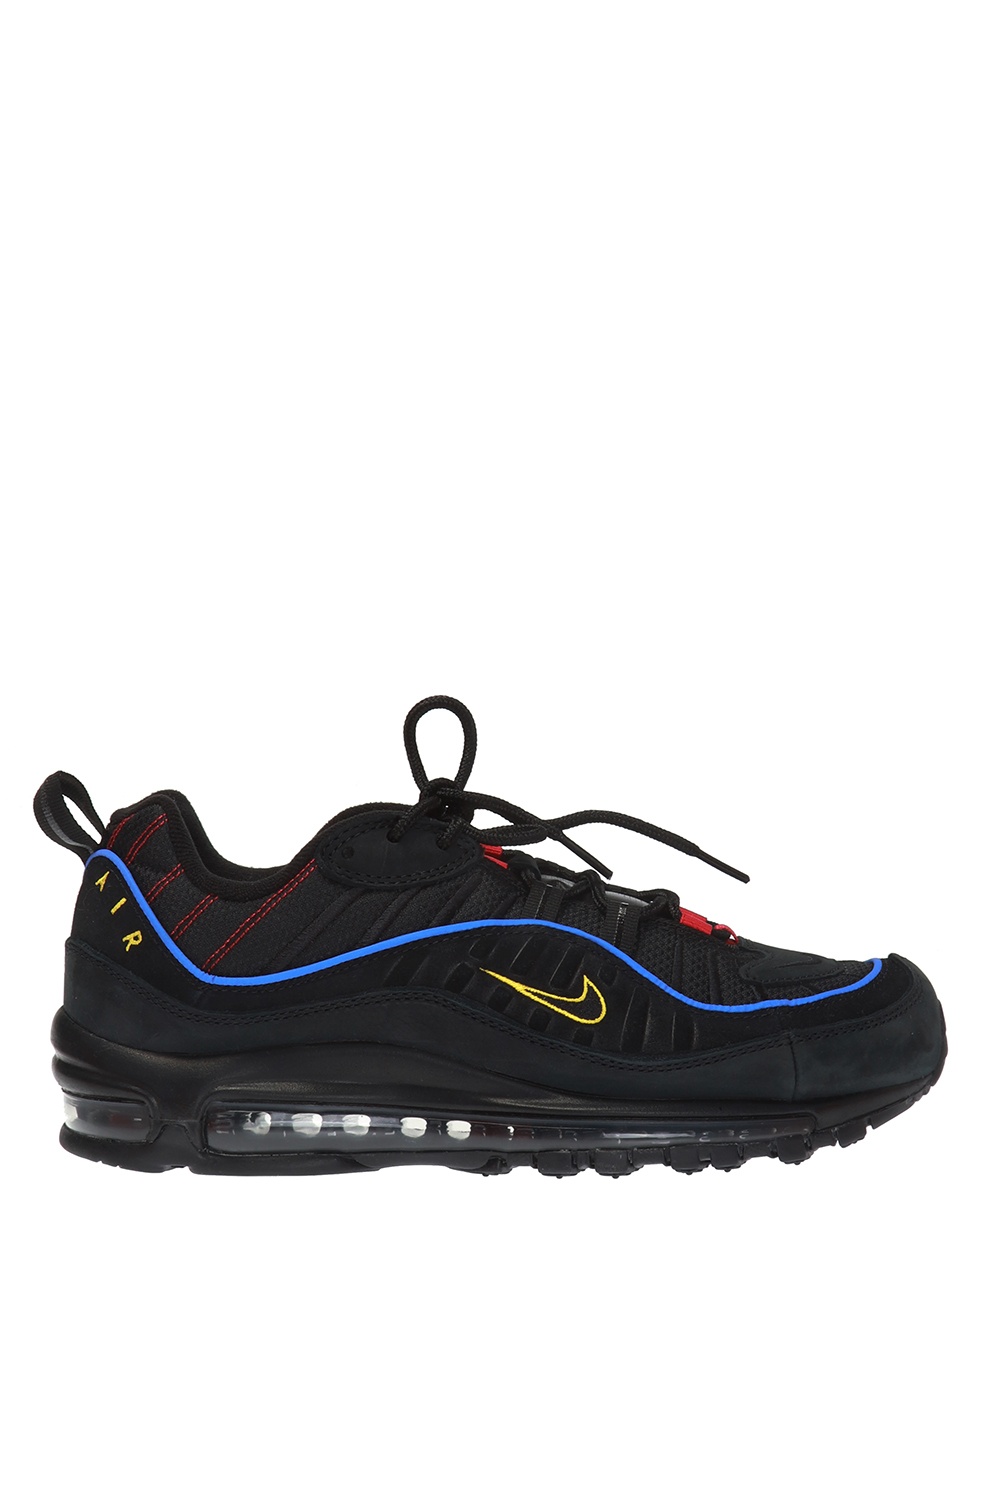 air max 98 size guide